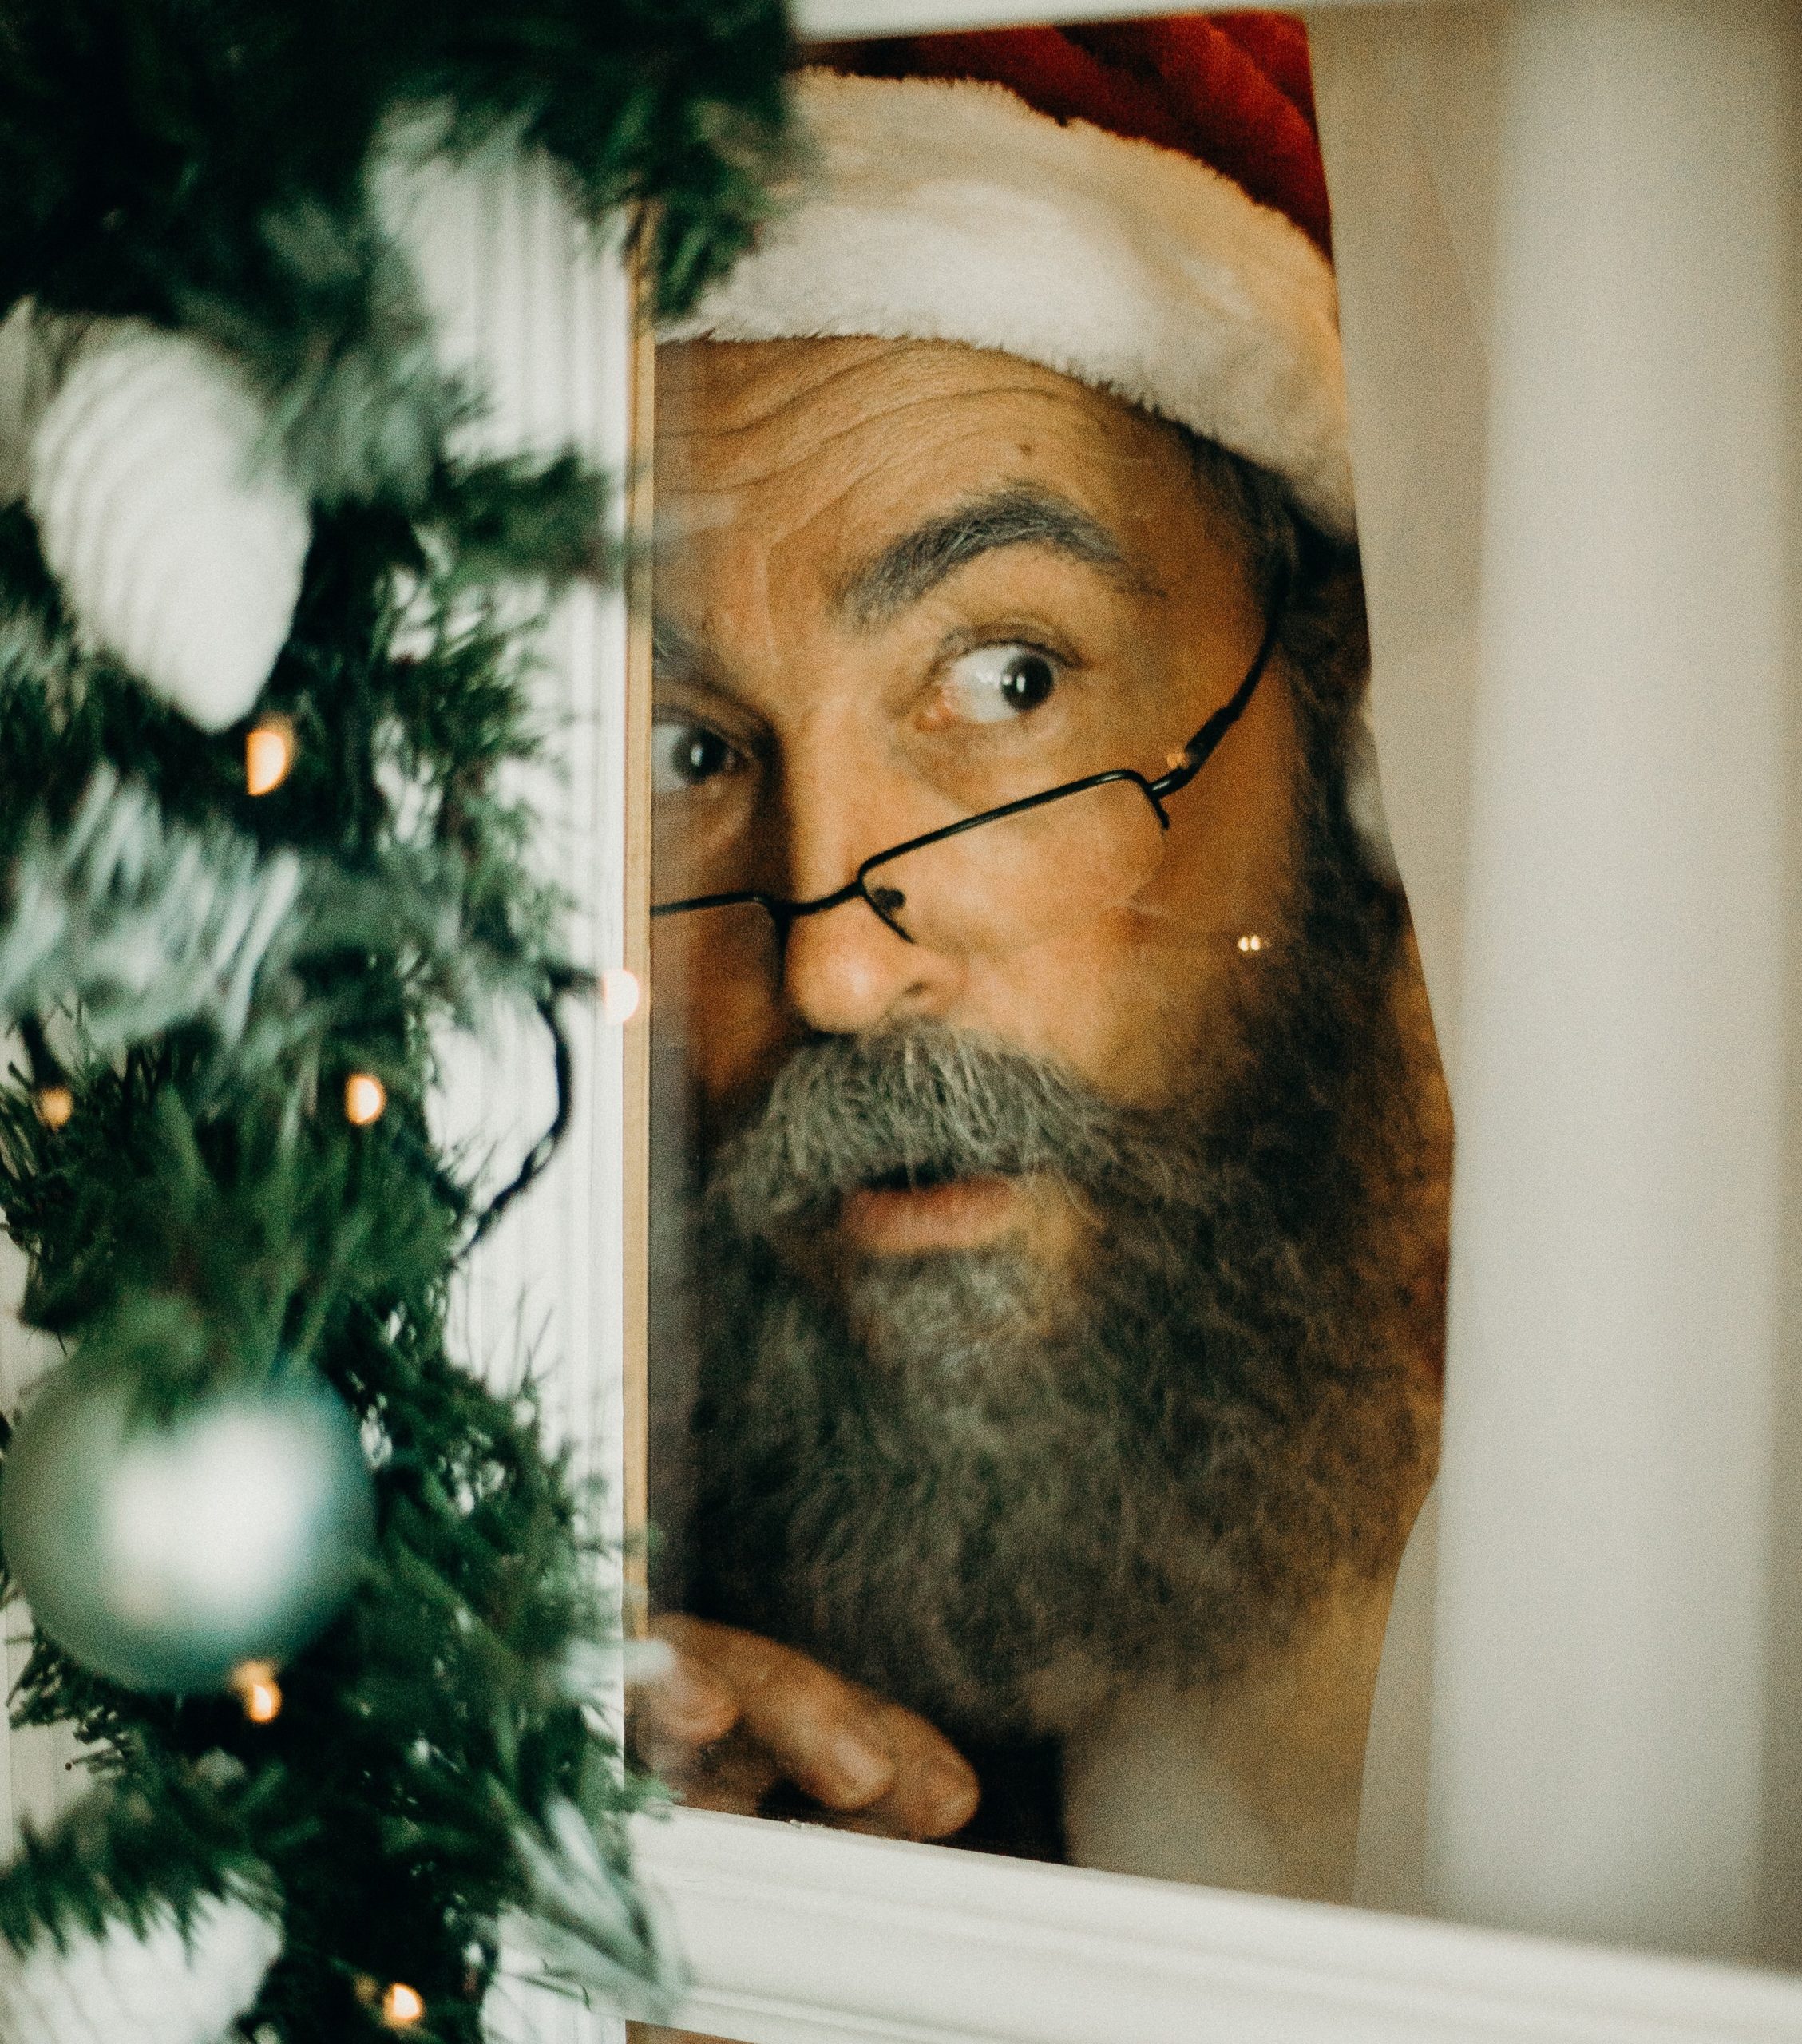 Closeup of Santa peeking out window from behind curtains